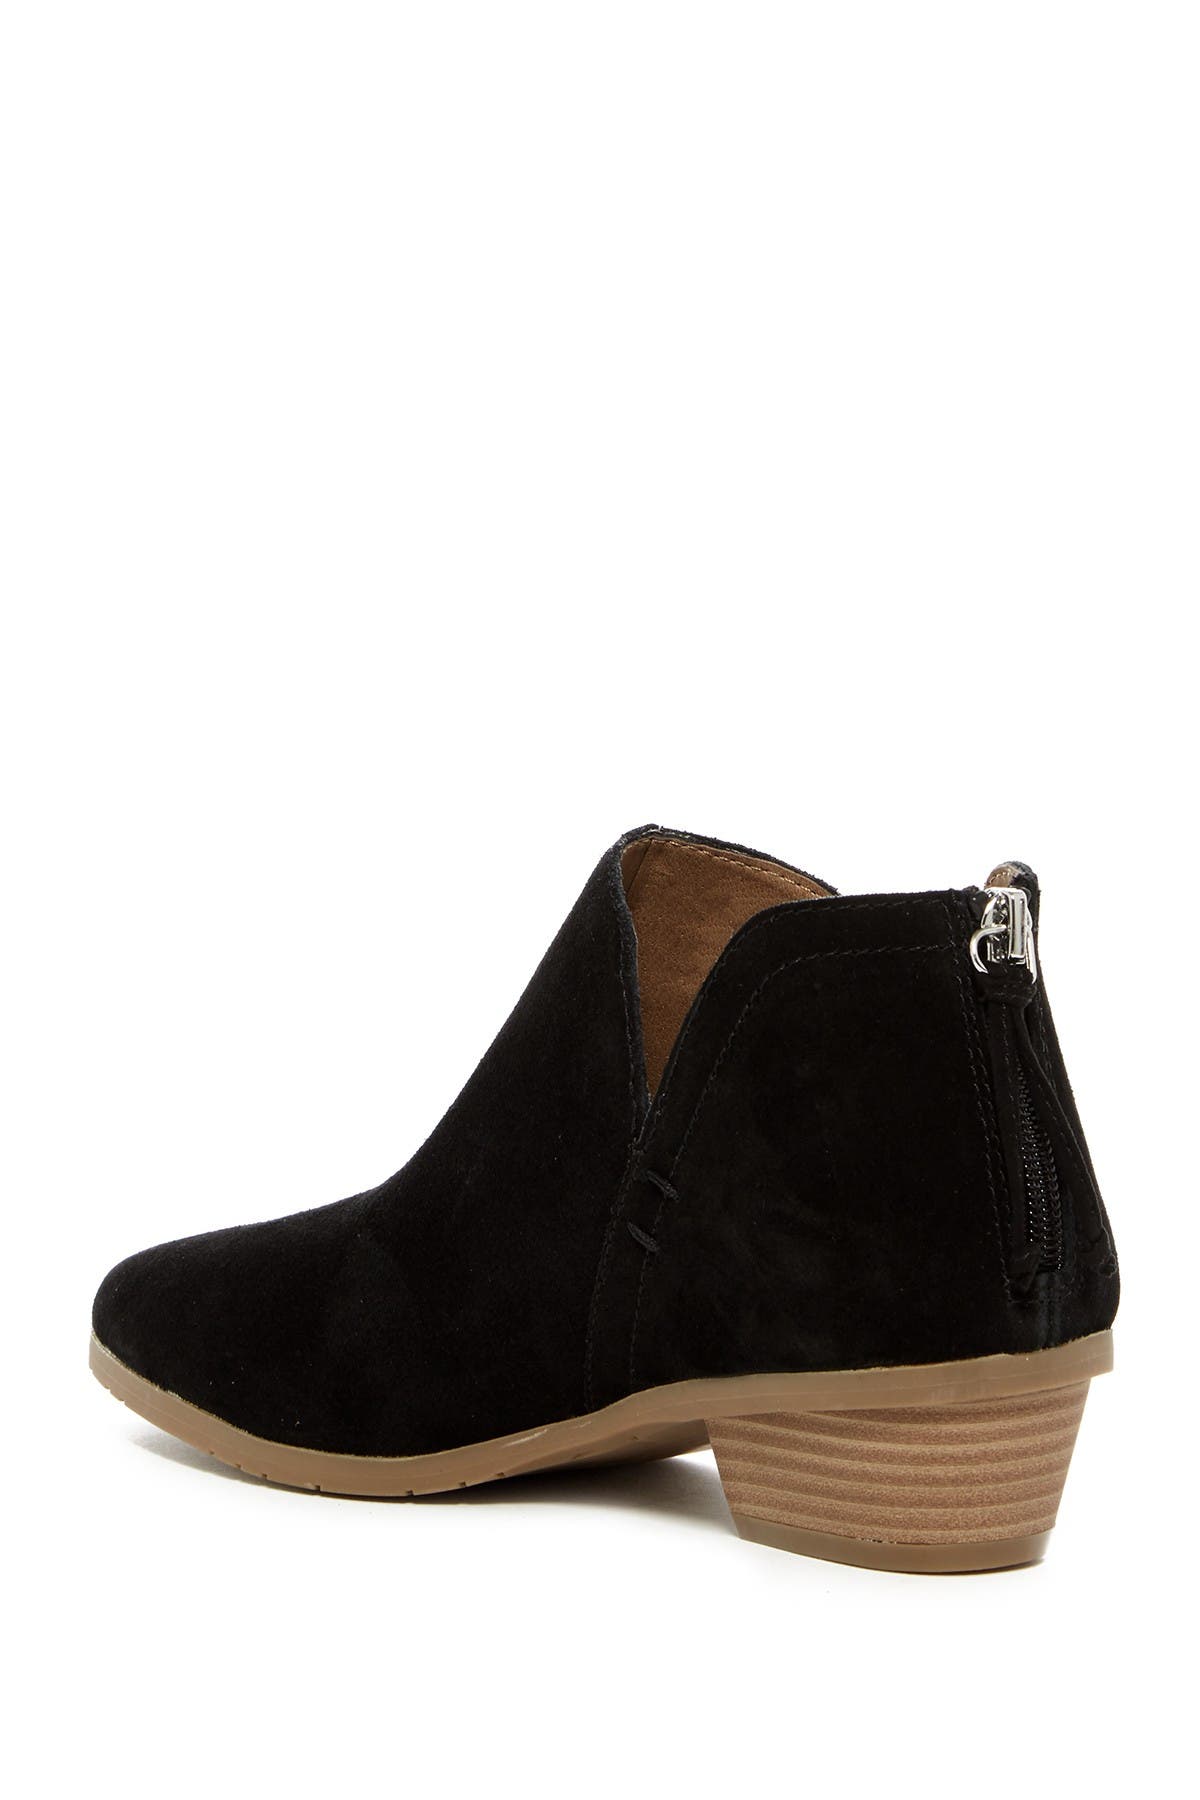 kenneth cole reaction side way suede ankle bootie